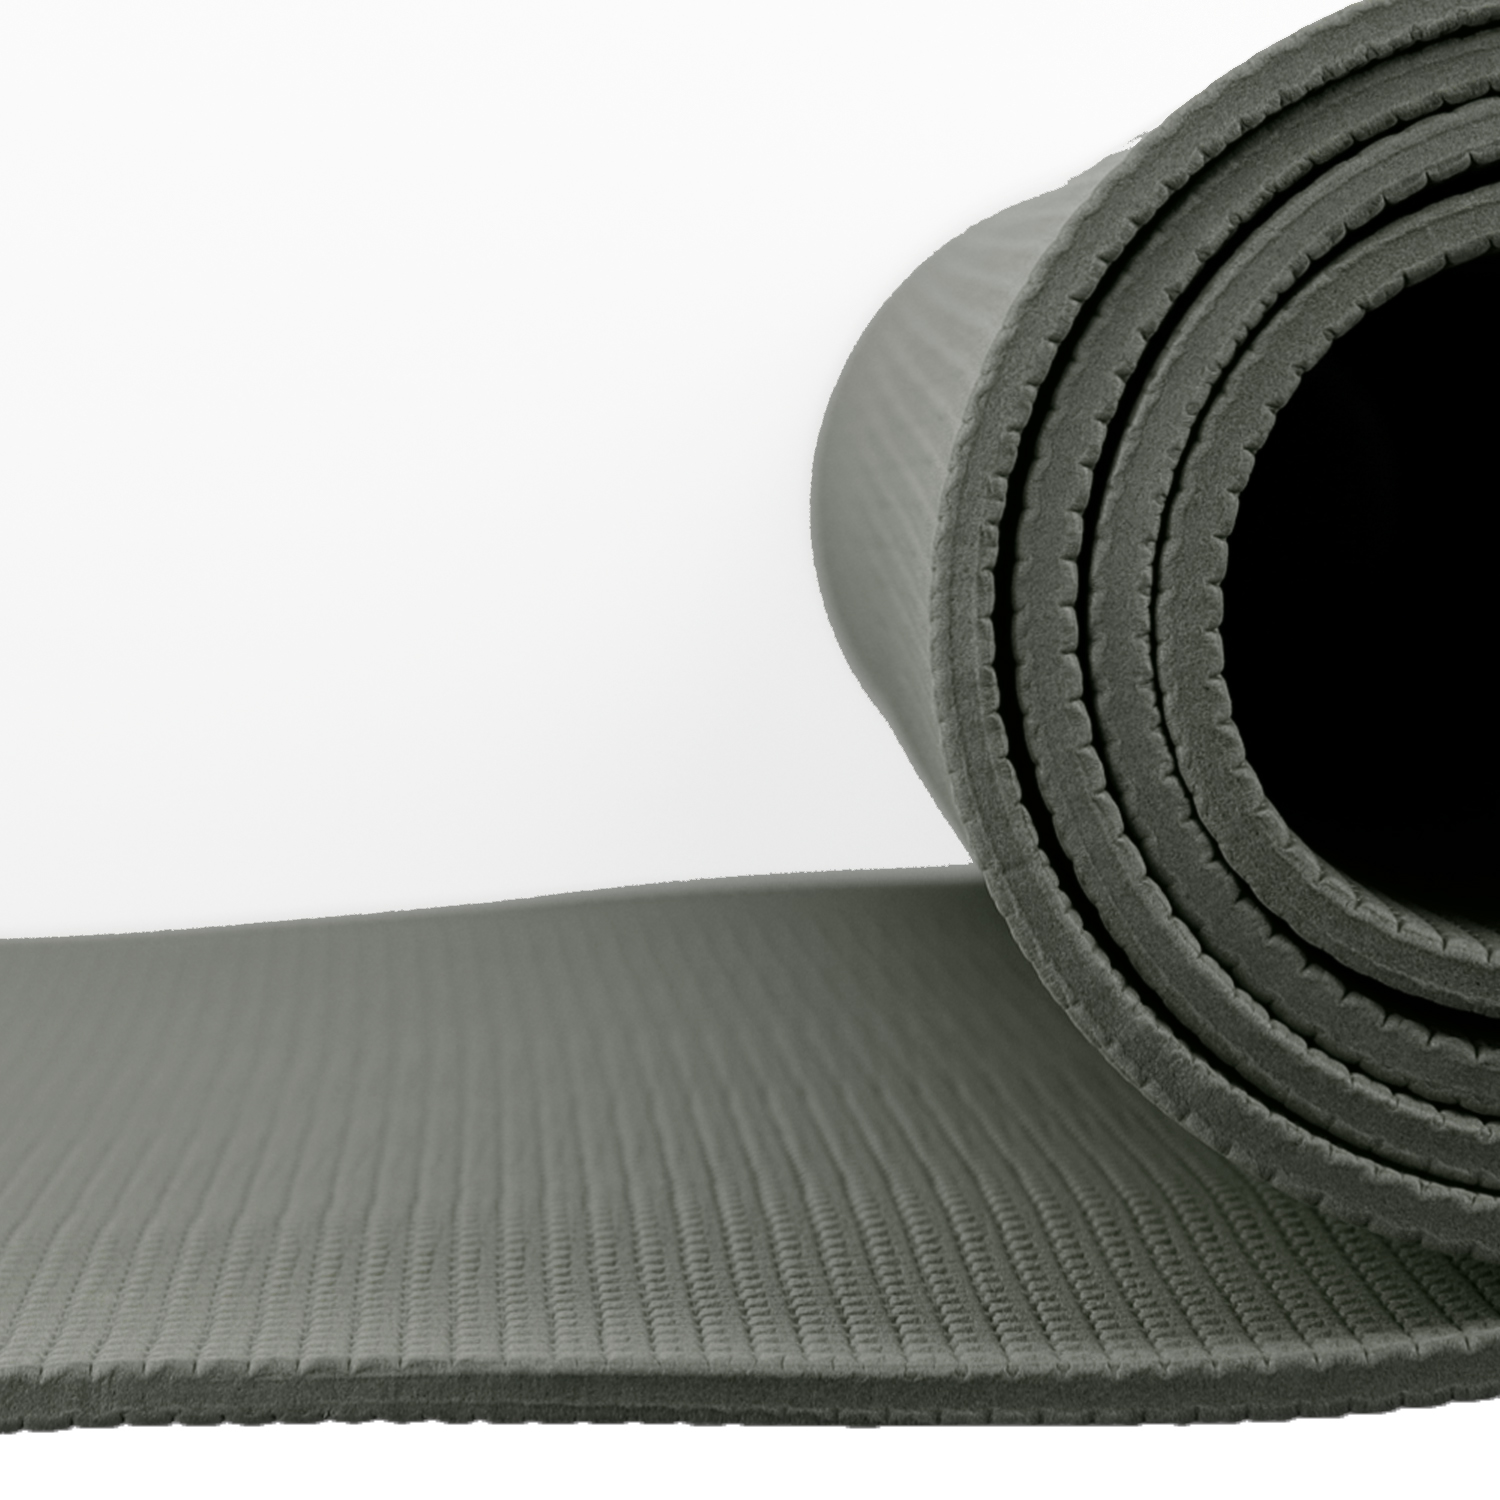 Steelbird Yoga Mat For Men And Women 6 X 2 Feet Wide Extra Thick Exercise Mat For Workout,Yoga,Fitness,Gym, Pilates And High-Density Anti-Tear Non-Slip Light Weight Mat (6mm Thickness)